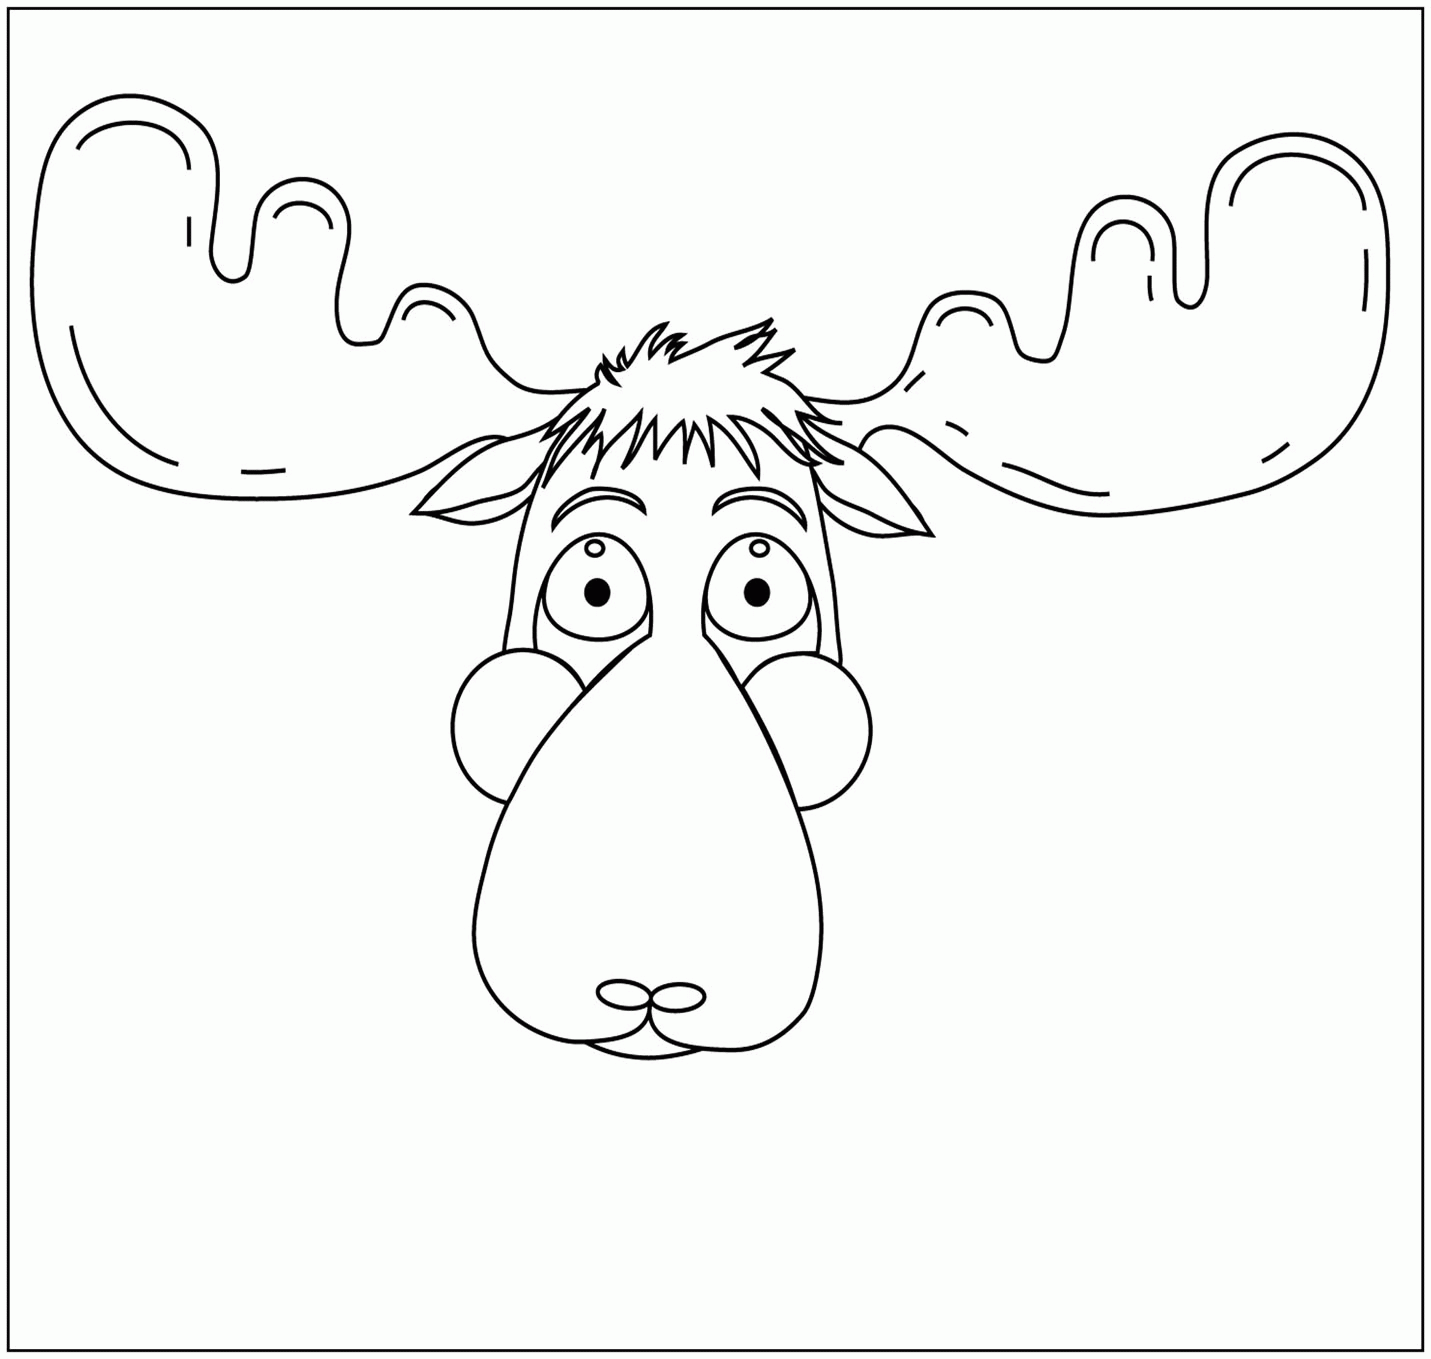 moose-coloring-page-0009-q1